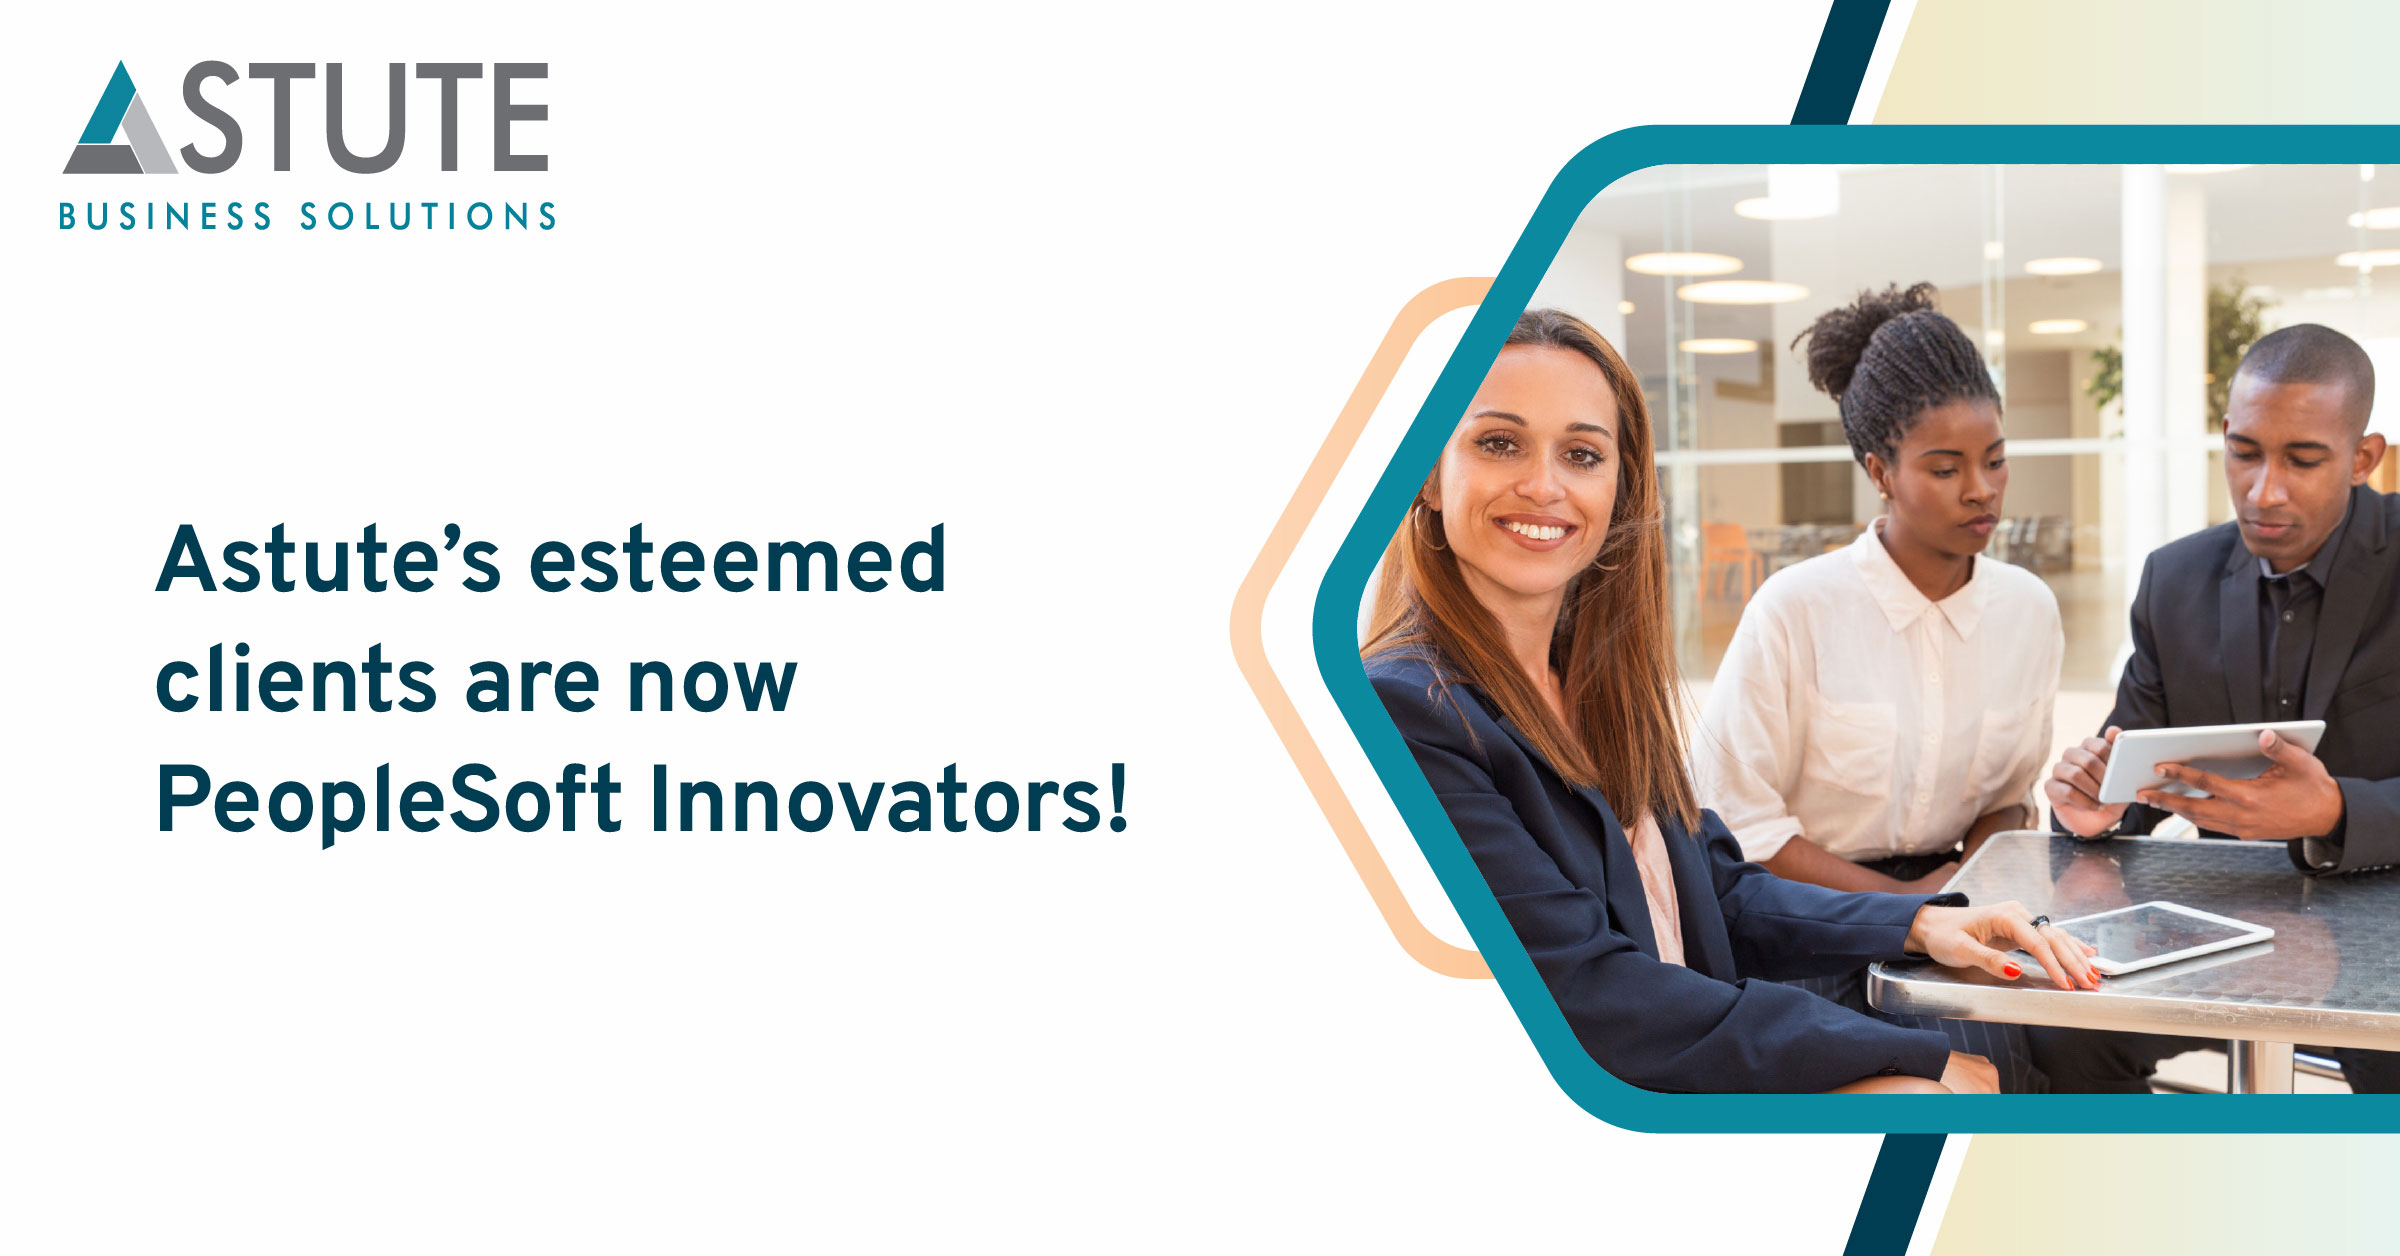 Astute’s Esteemed Clients Are Now PeopleSoft Innovators!